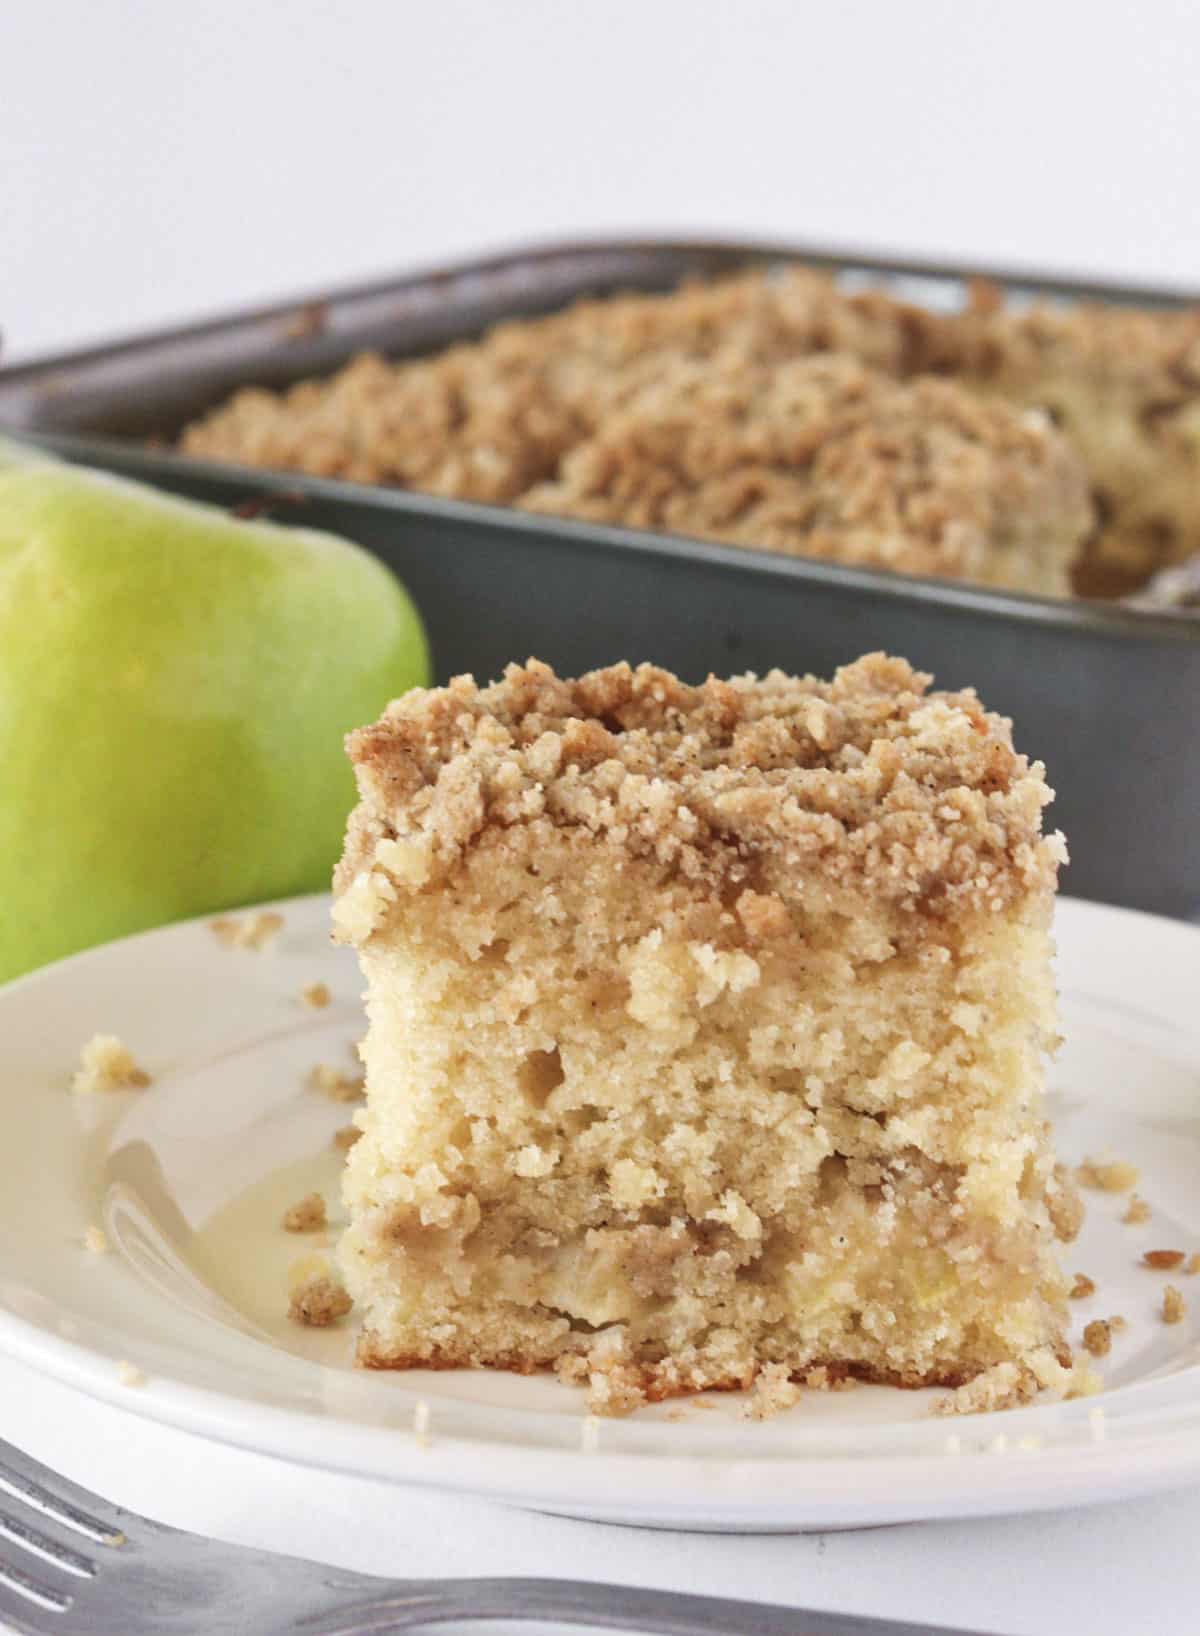 Serving a slice of apple crumb cake from the pan.